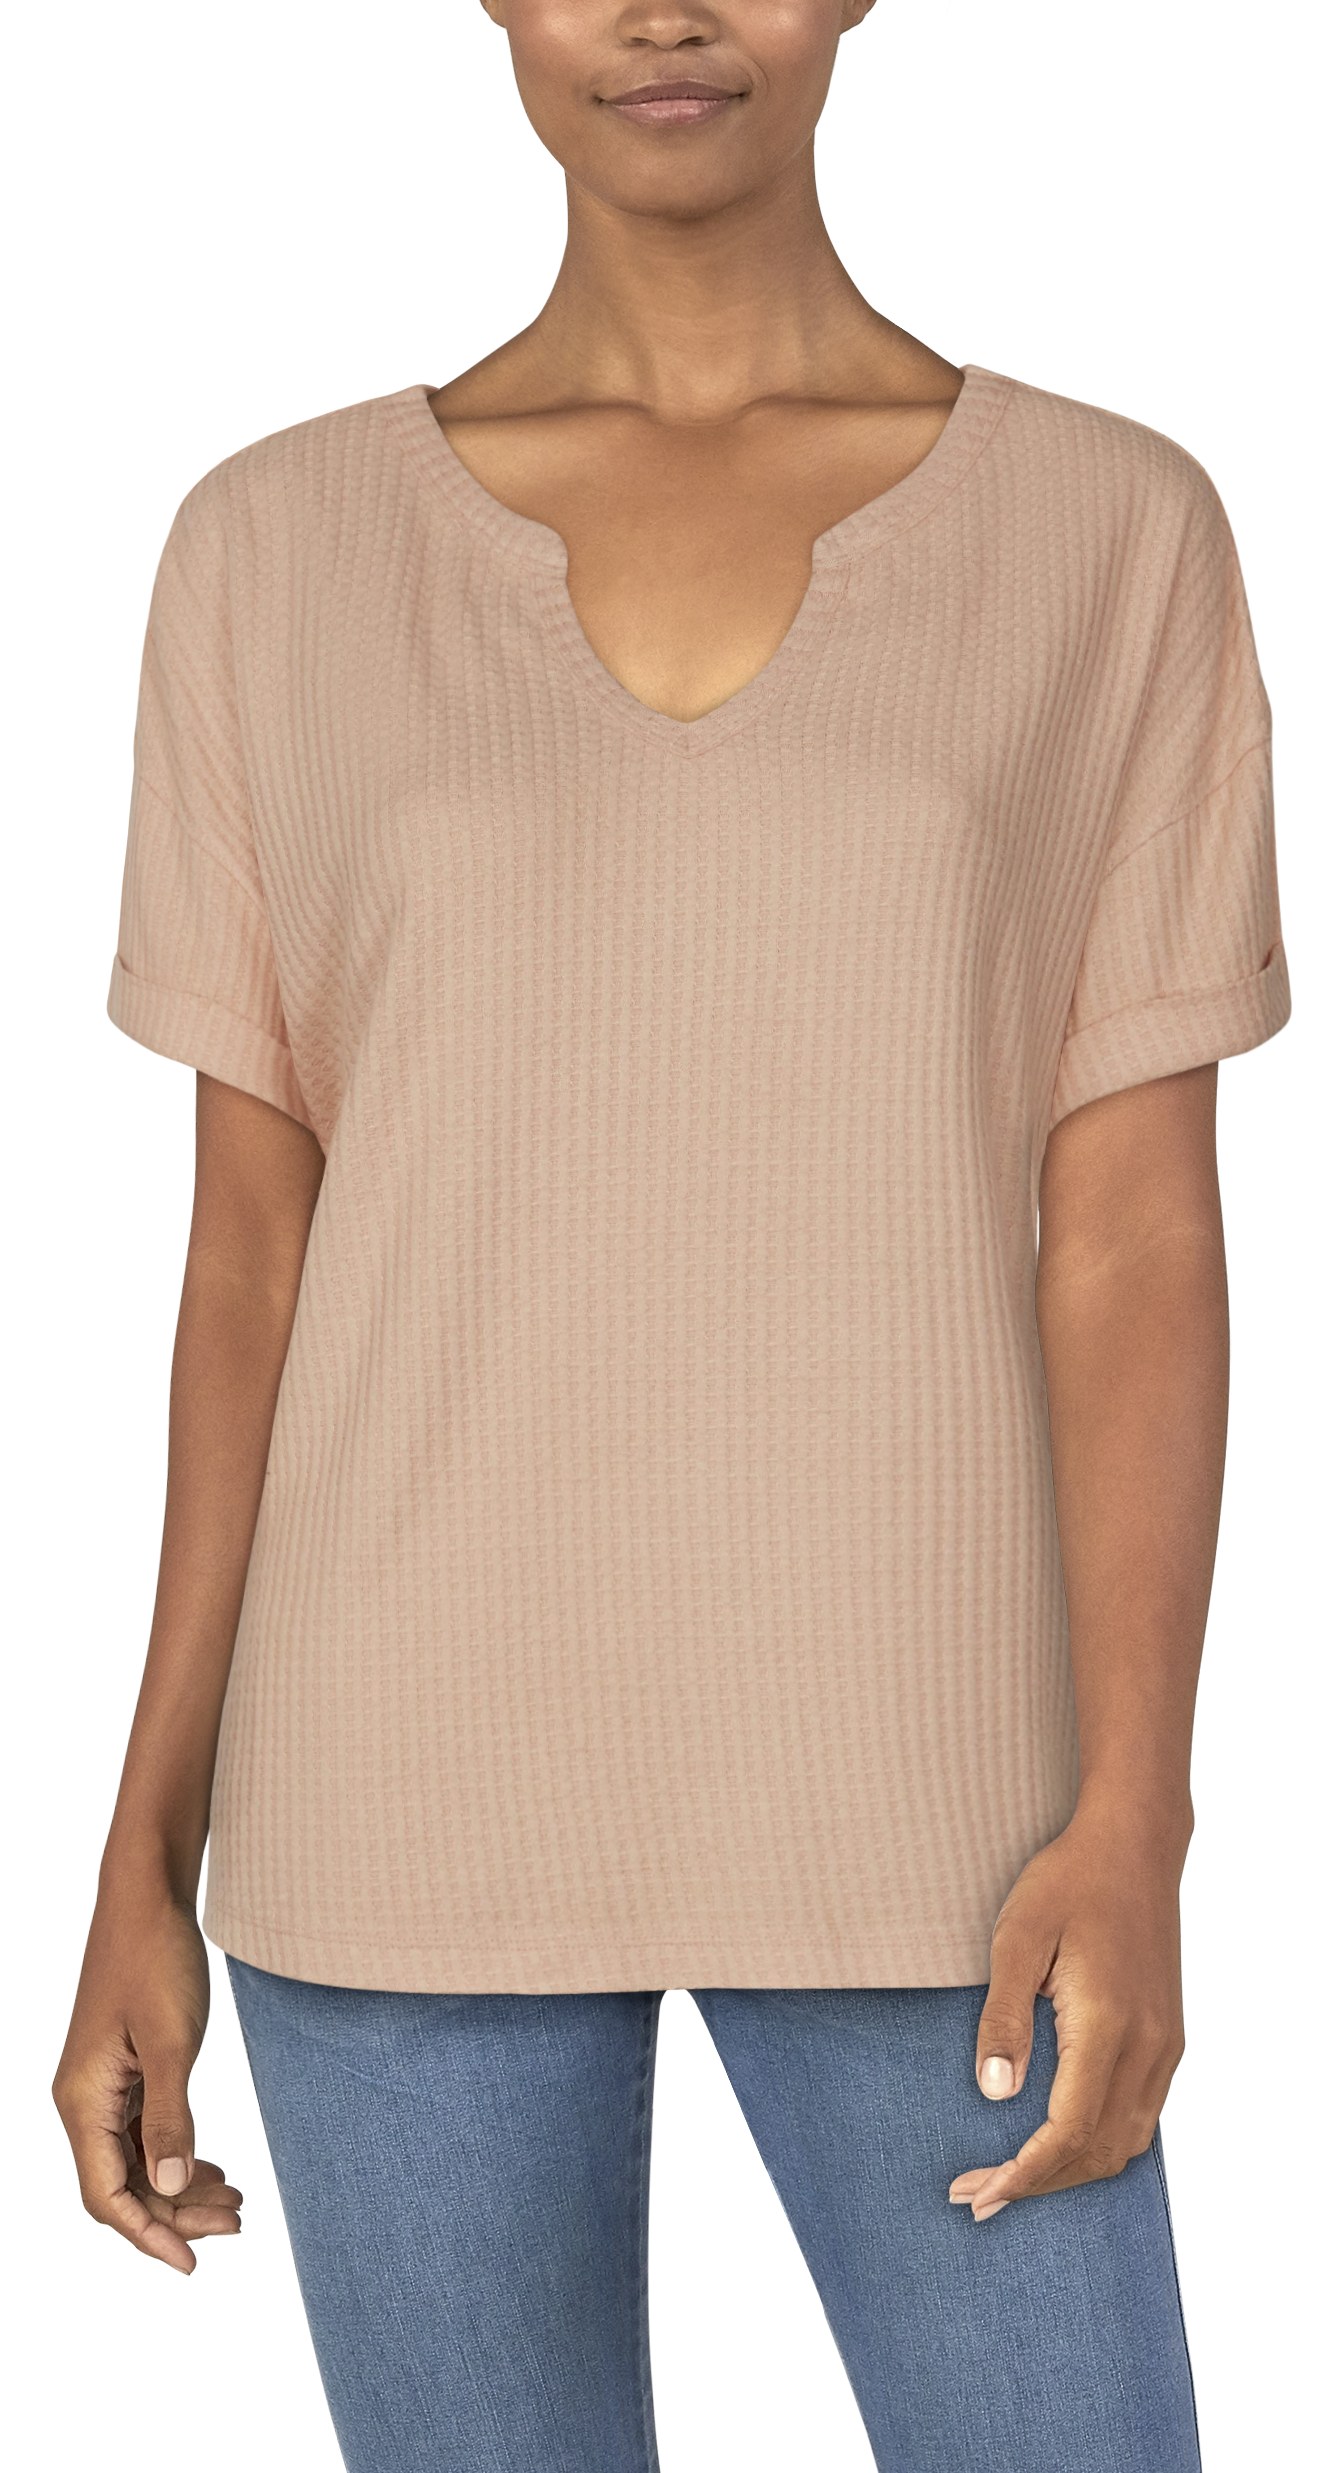 Natural Reflections Brush Creek Waffle Short-Sleeve Shirt for Ladies - Almost Apricot - 1X